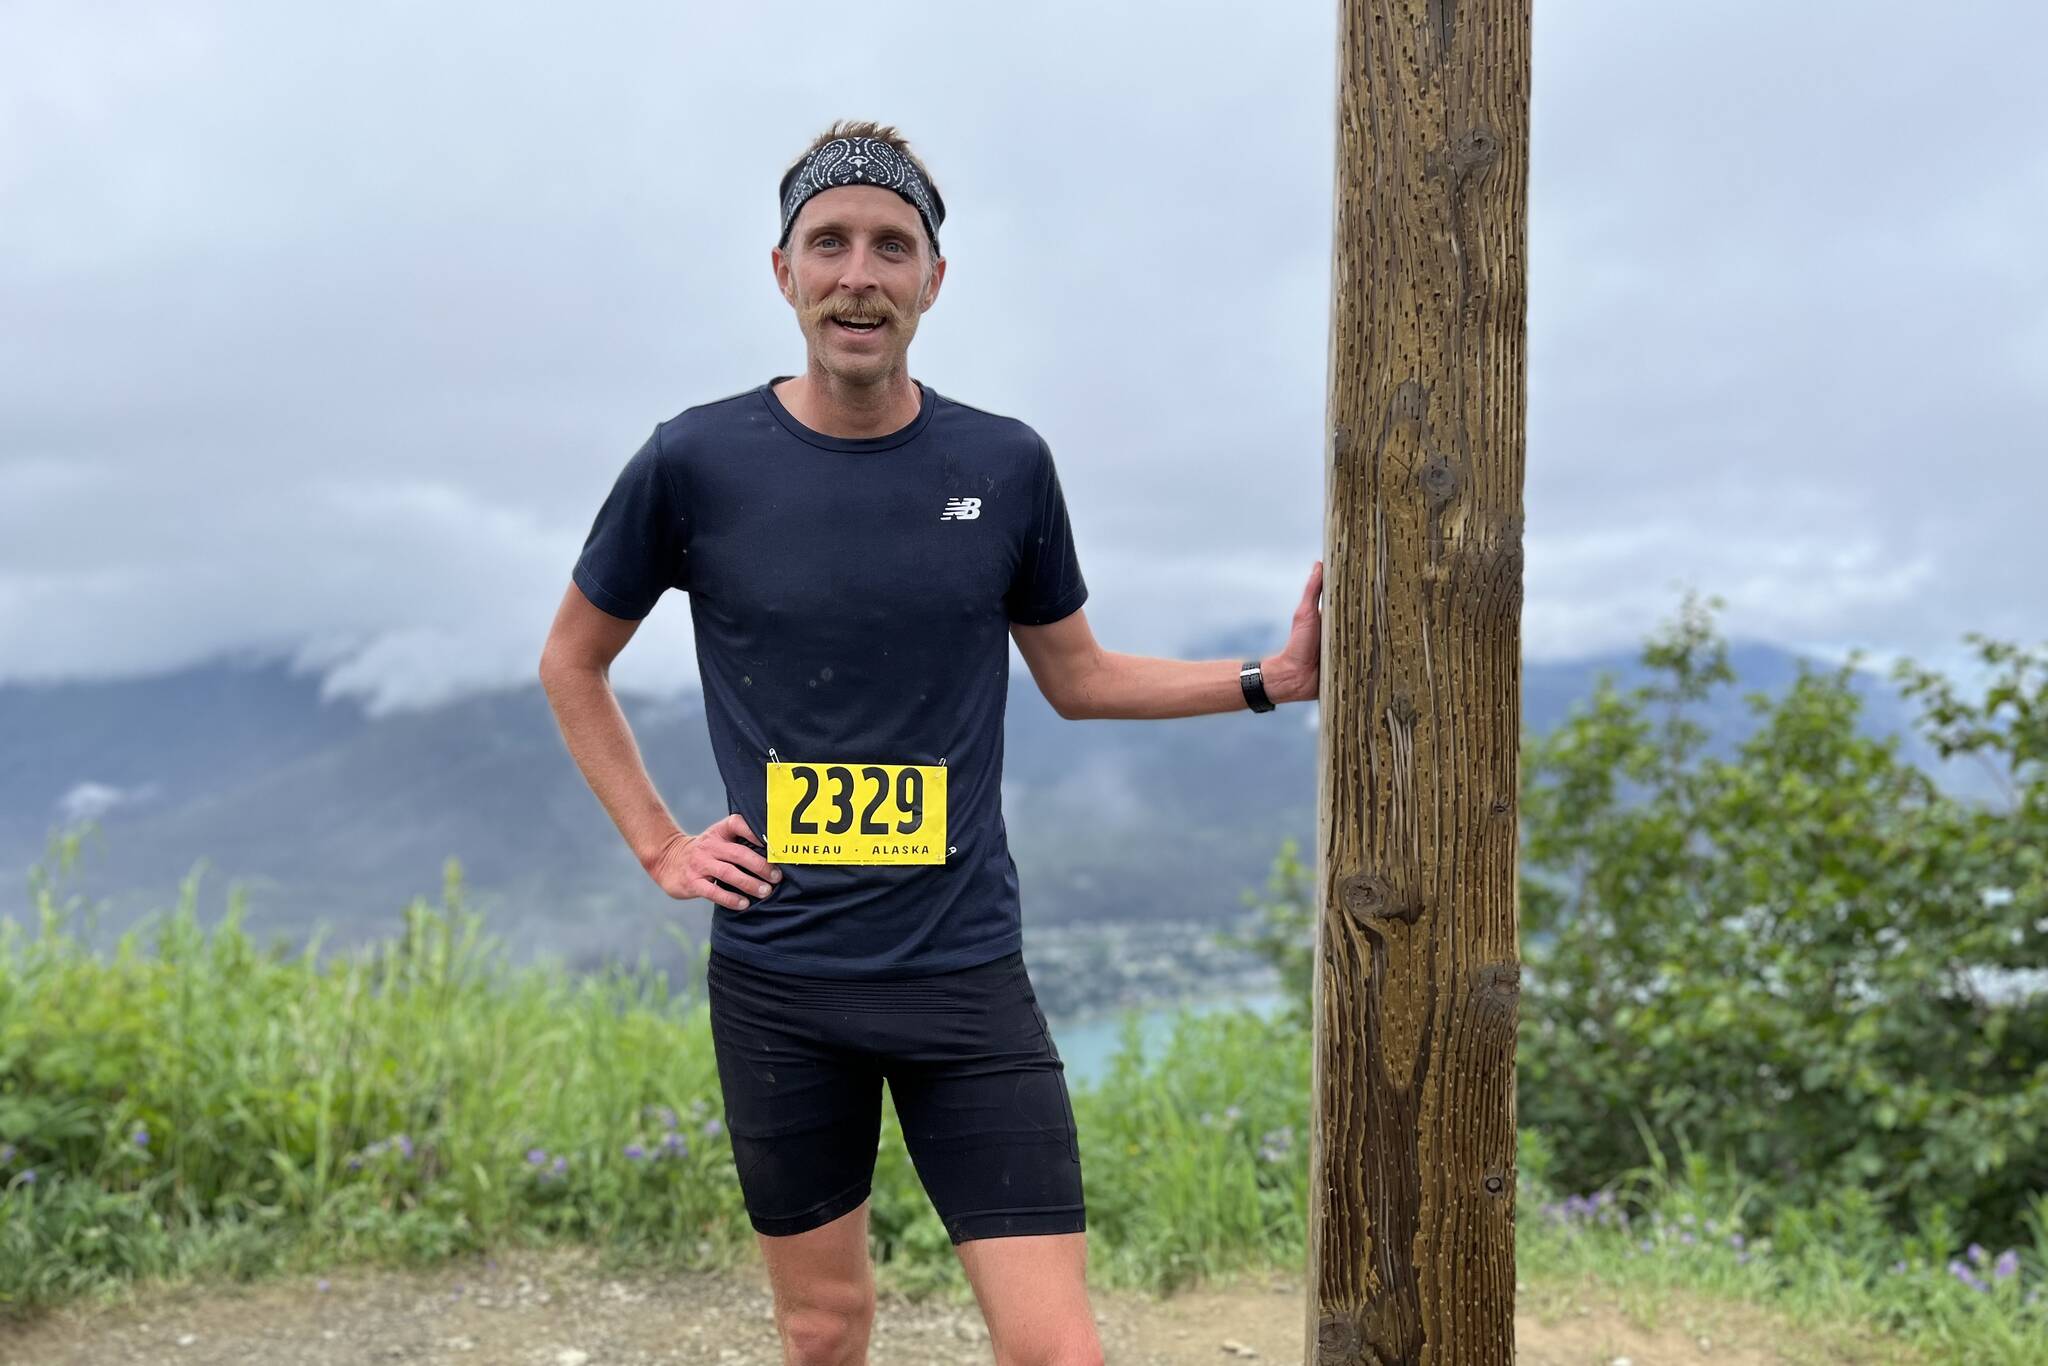 This year’s Mount Roberts Trail Race first-place winner Seth Rutt catches his breath after completing the race in under 40 minutes. (Jonson Kuhn / Juneau Empire)